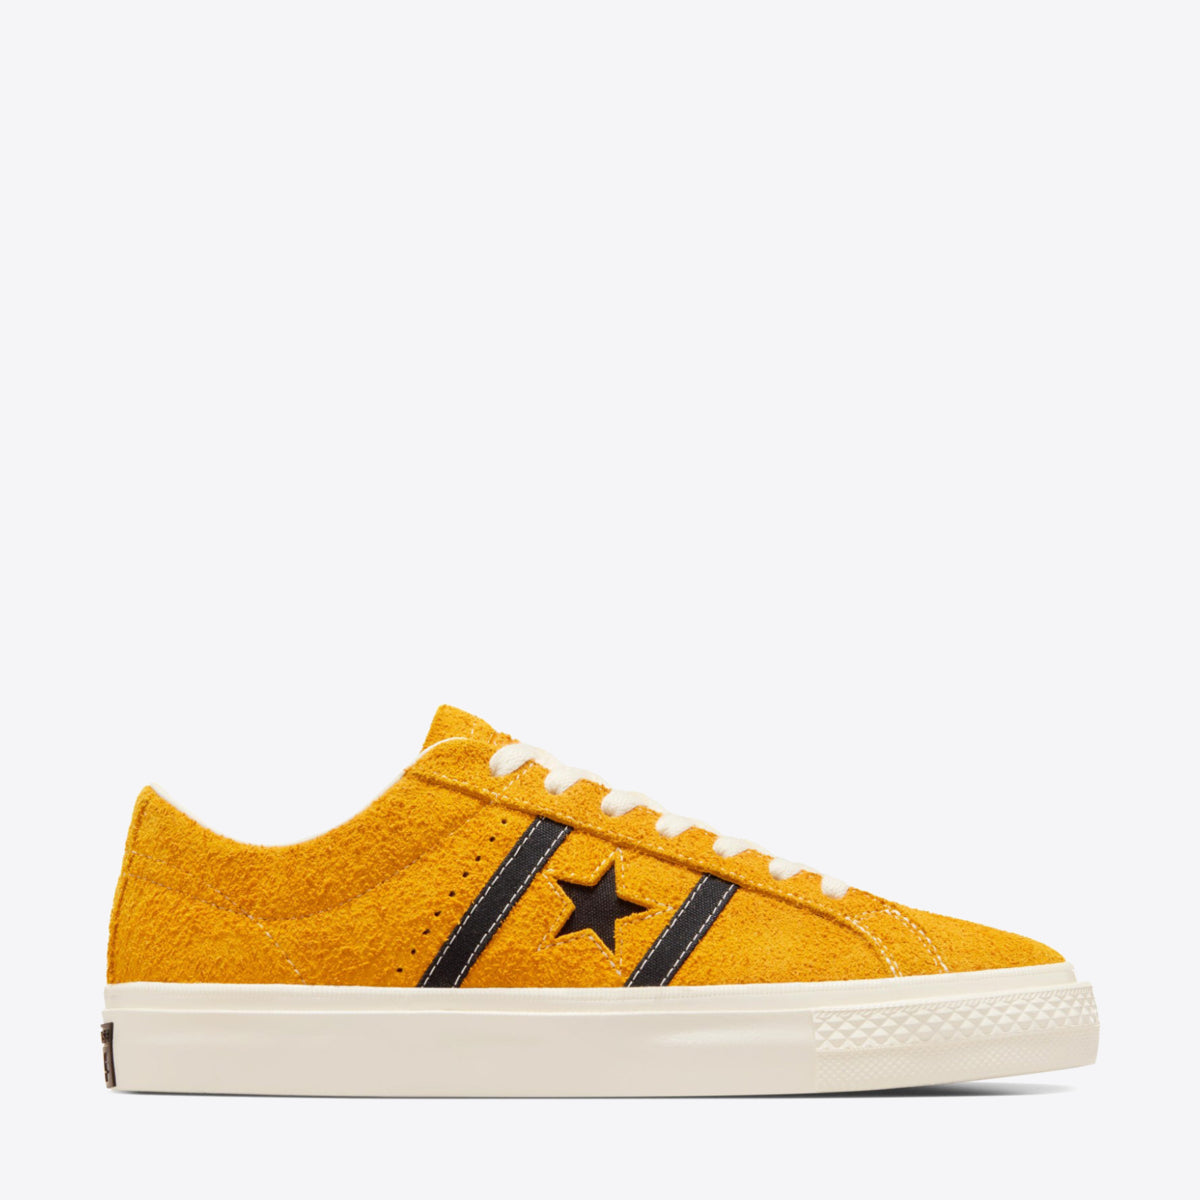 CONVERSE One Star Academy Pro Low Sunflower Gold/Black - Image 1